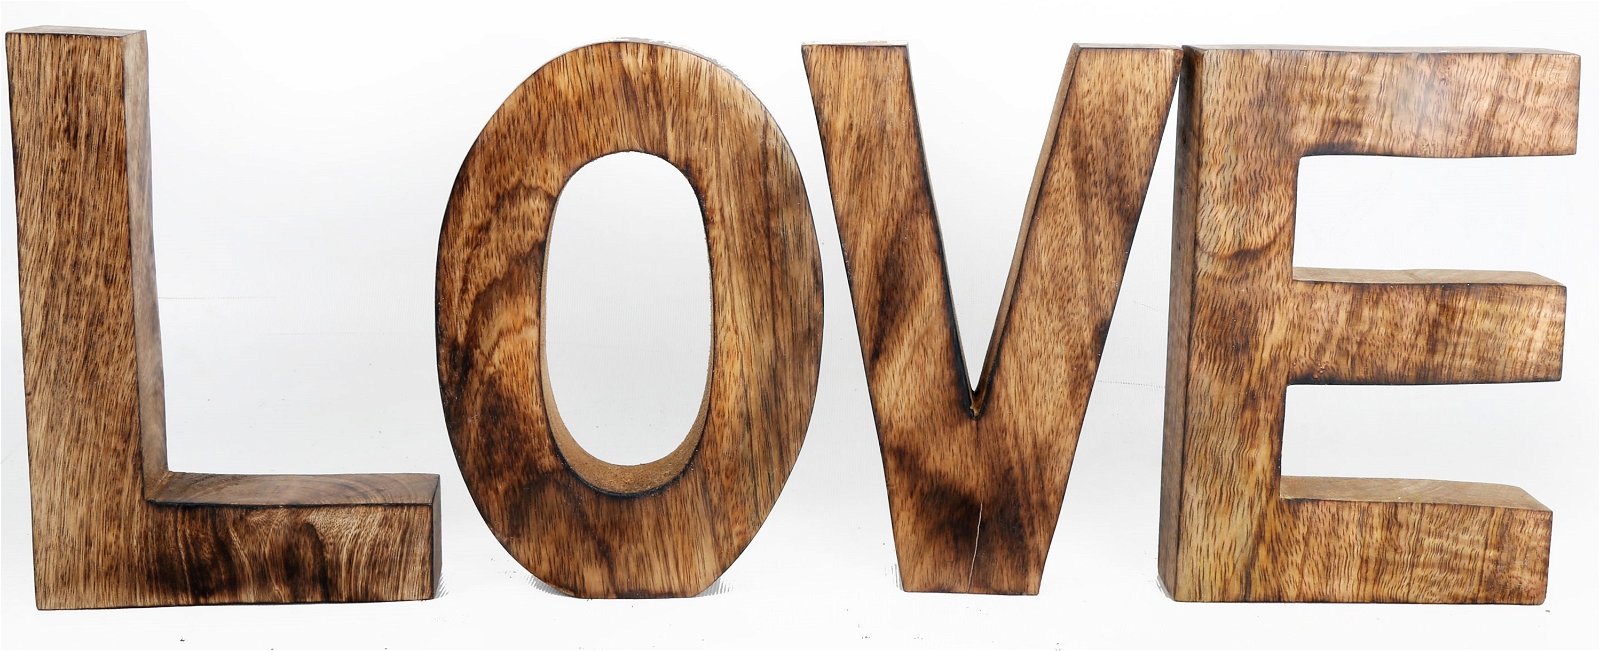 LOVE Wooden Letters Sign Willow and Wine